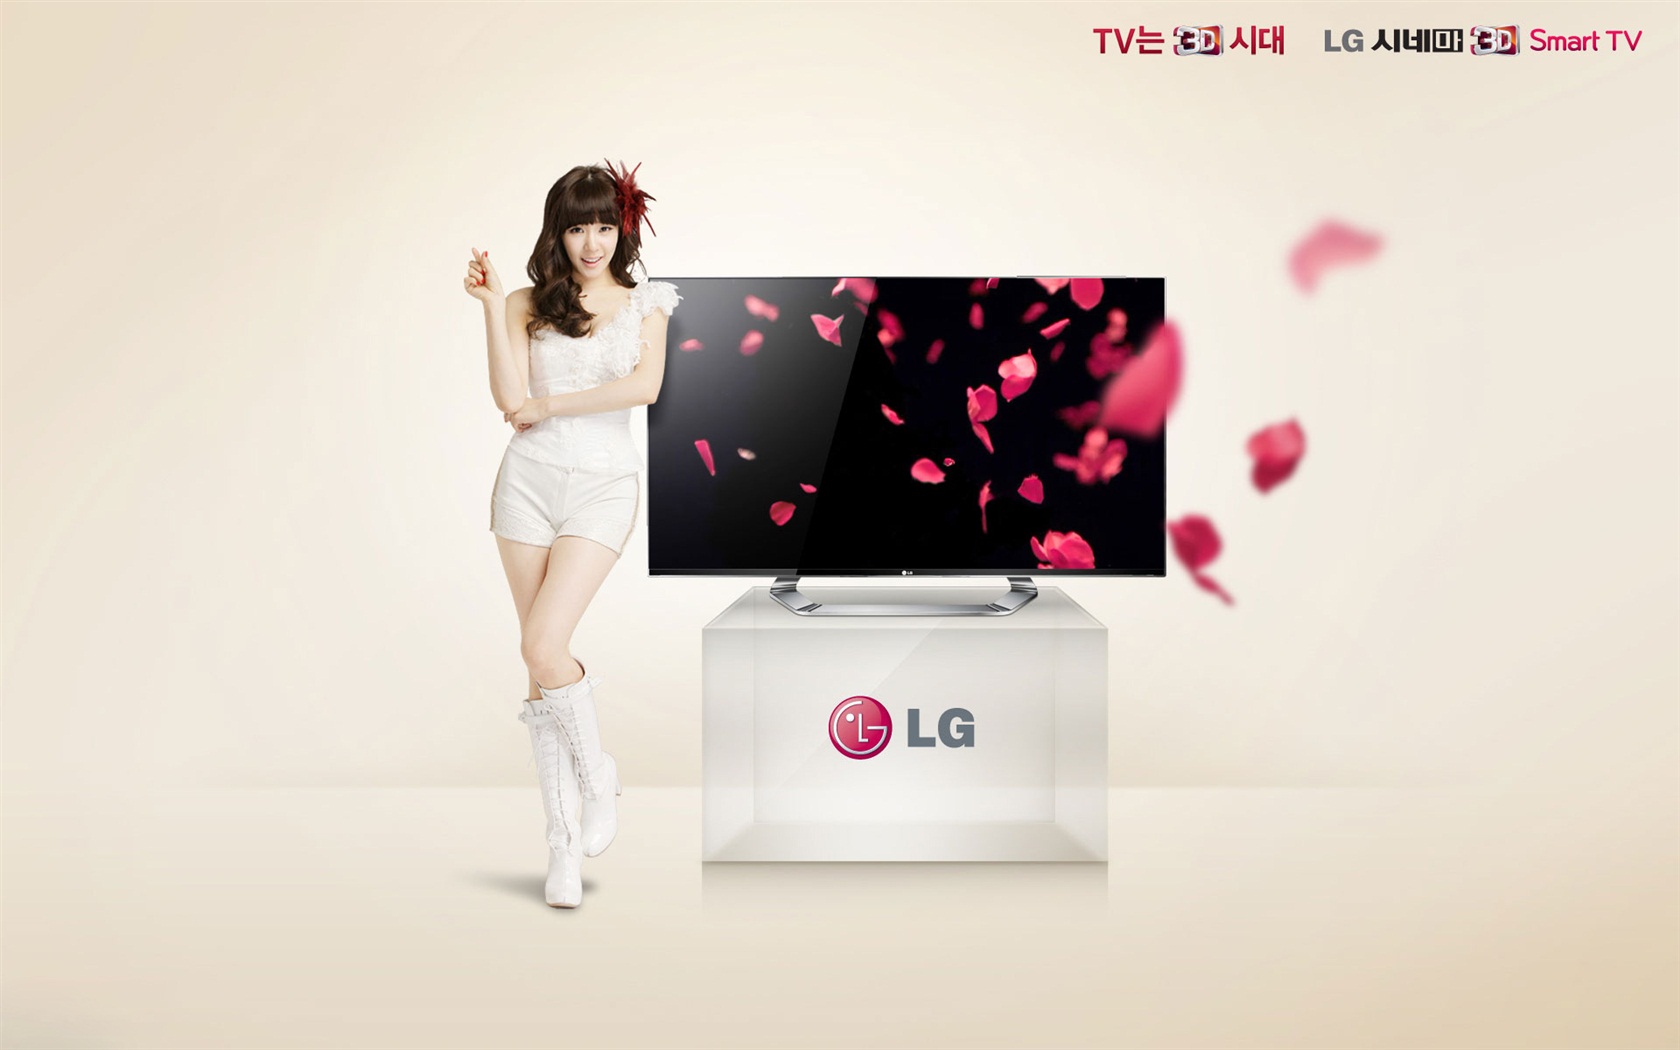 Girls Generation ACE and LG endorsements ads HD wallpapers #15 - 1680x1050